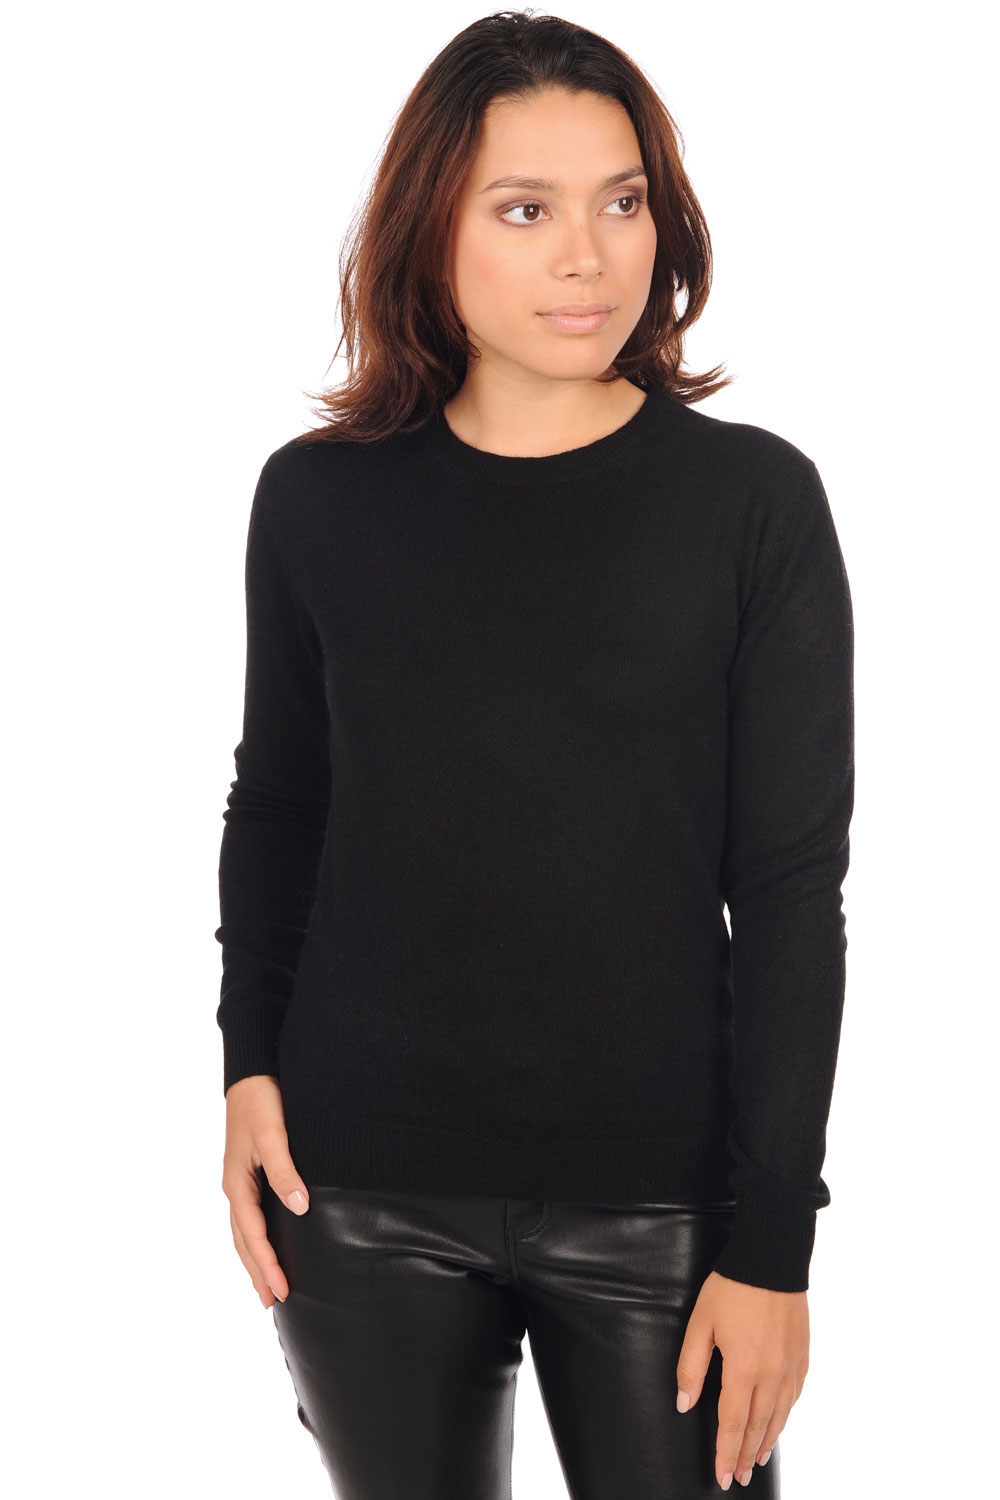 Cashmere ladies basic sweaters at low prices thalia first black l